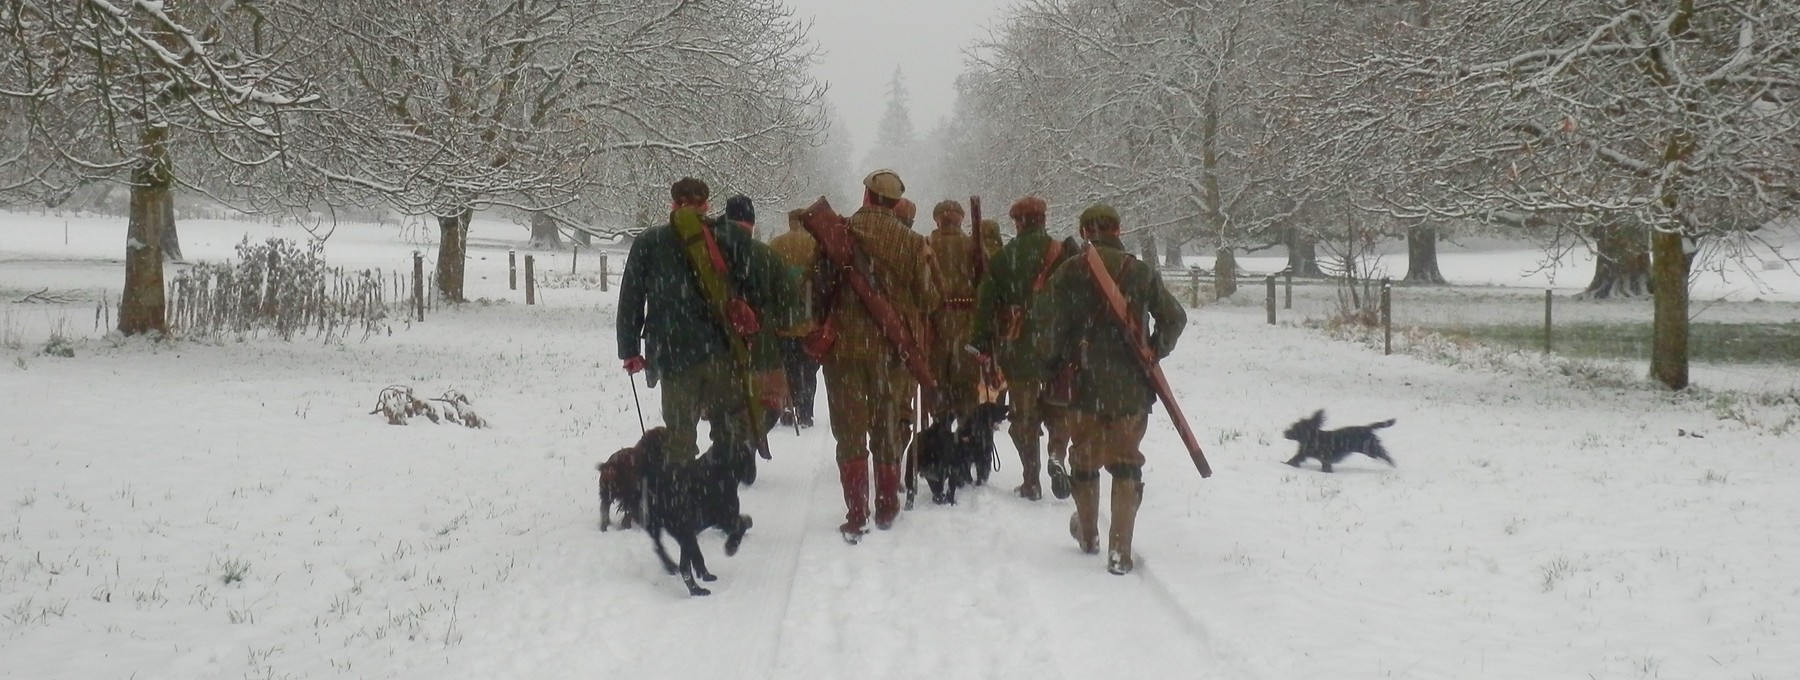 Shooting party on Murthly Estate - A pheasant shooting party heads off to the next drive in the wintry snow (© Murthly Estate)